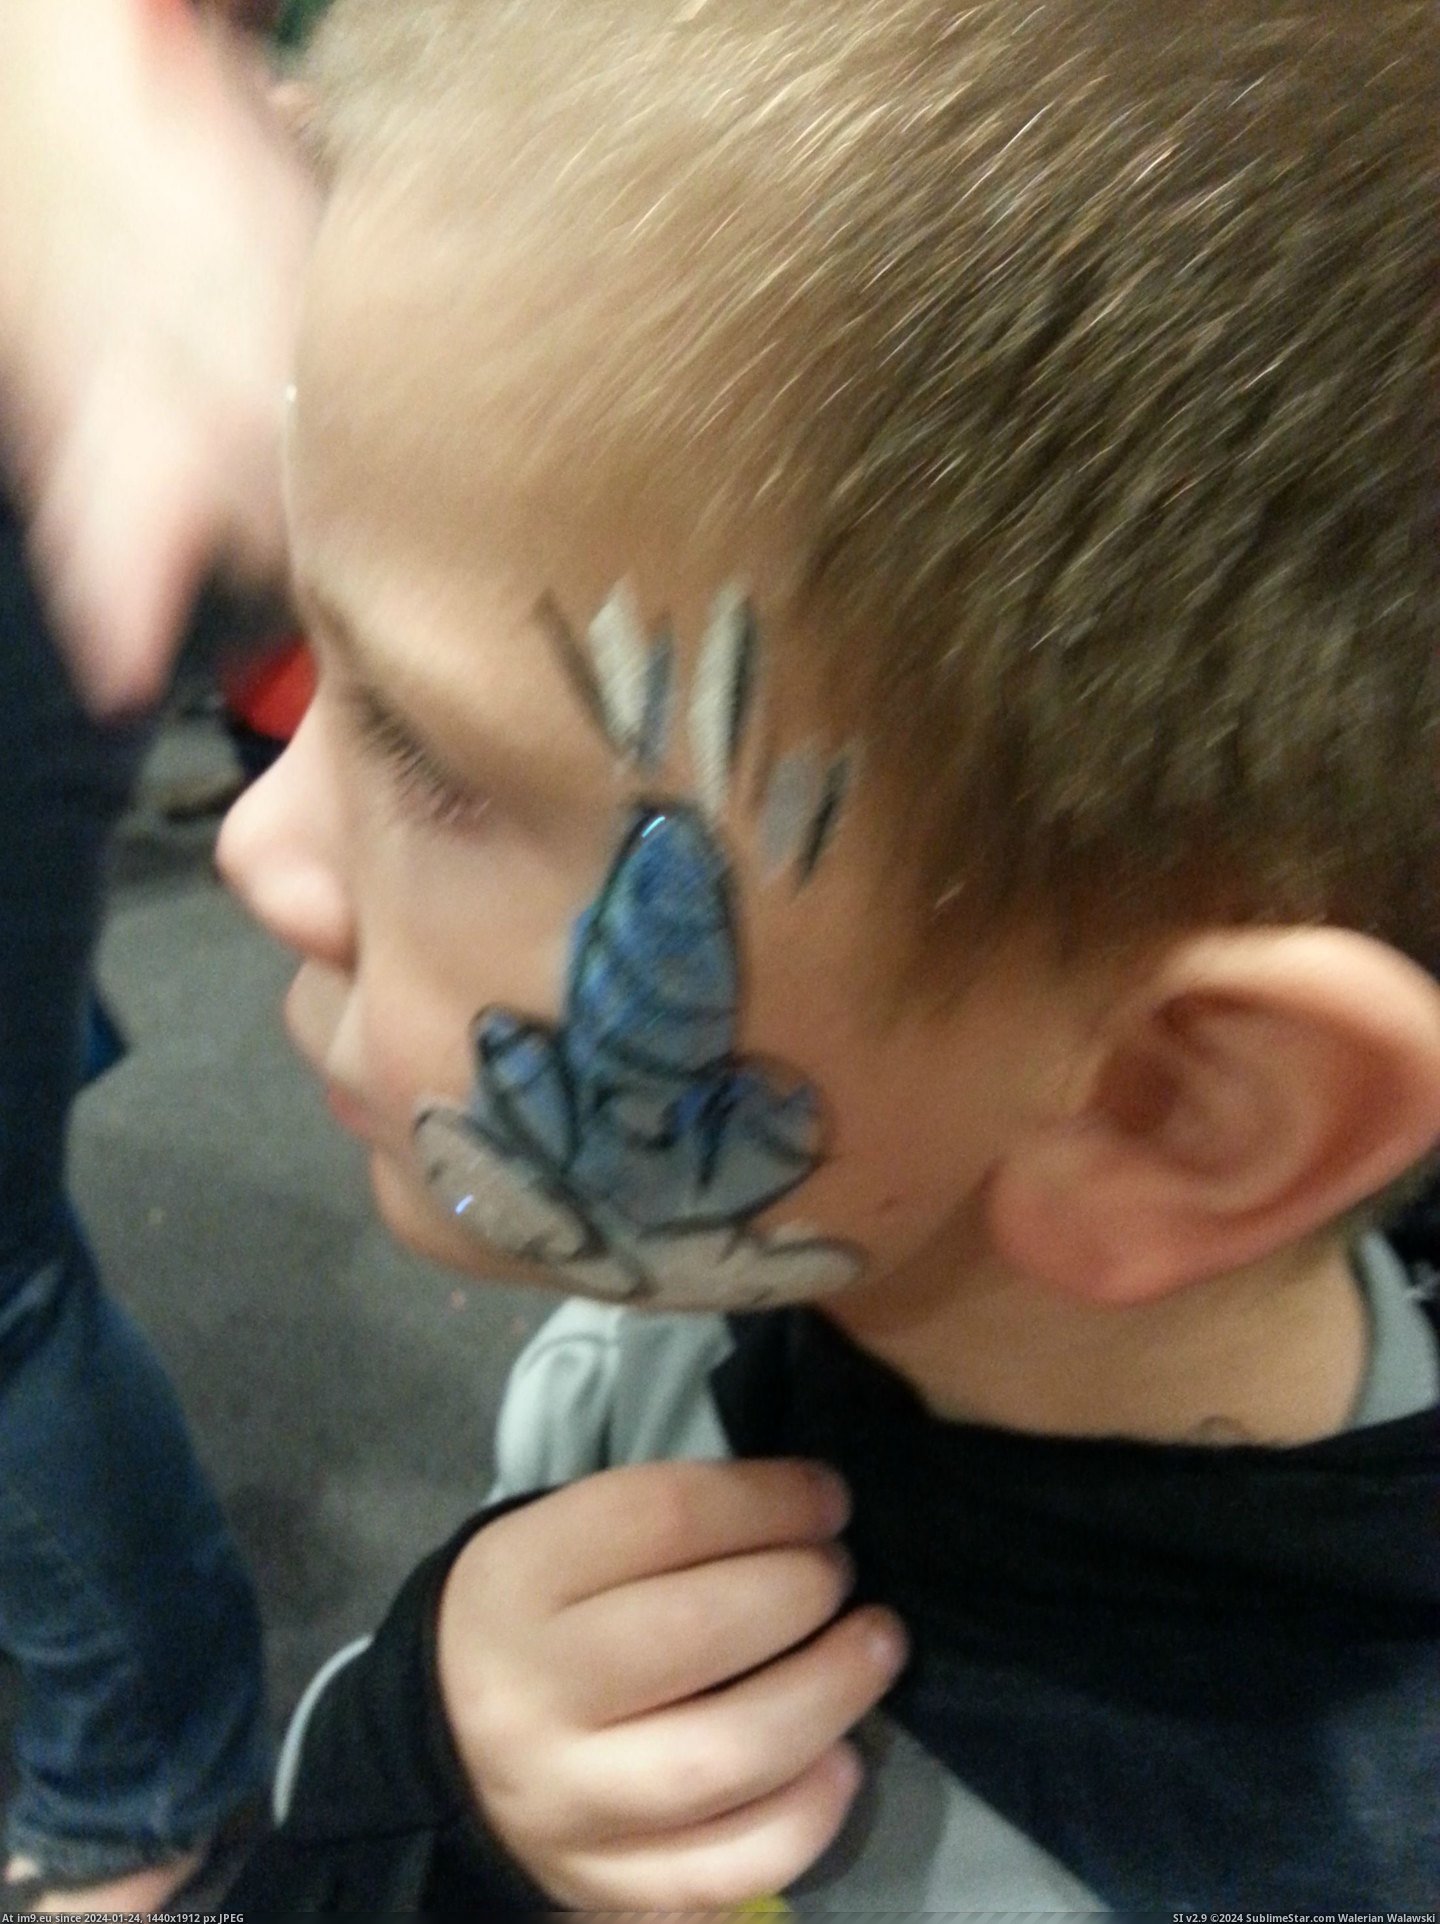 #Wtf #For #Face #Awkward #Evening #Clown #Rocket #Son #Church #Drew [Wtf] A clown drew this 'rocket' on my son's face at a church function. Made for an awkward evening. [OC] Pic. (Bild von album My r/WTF favs))